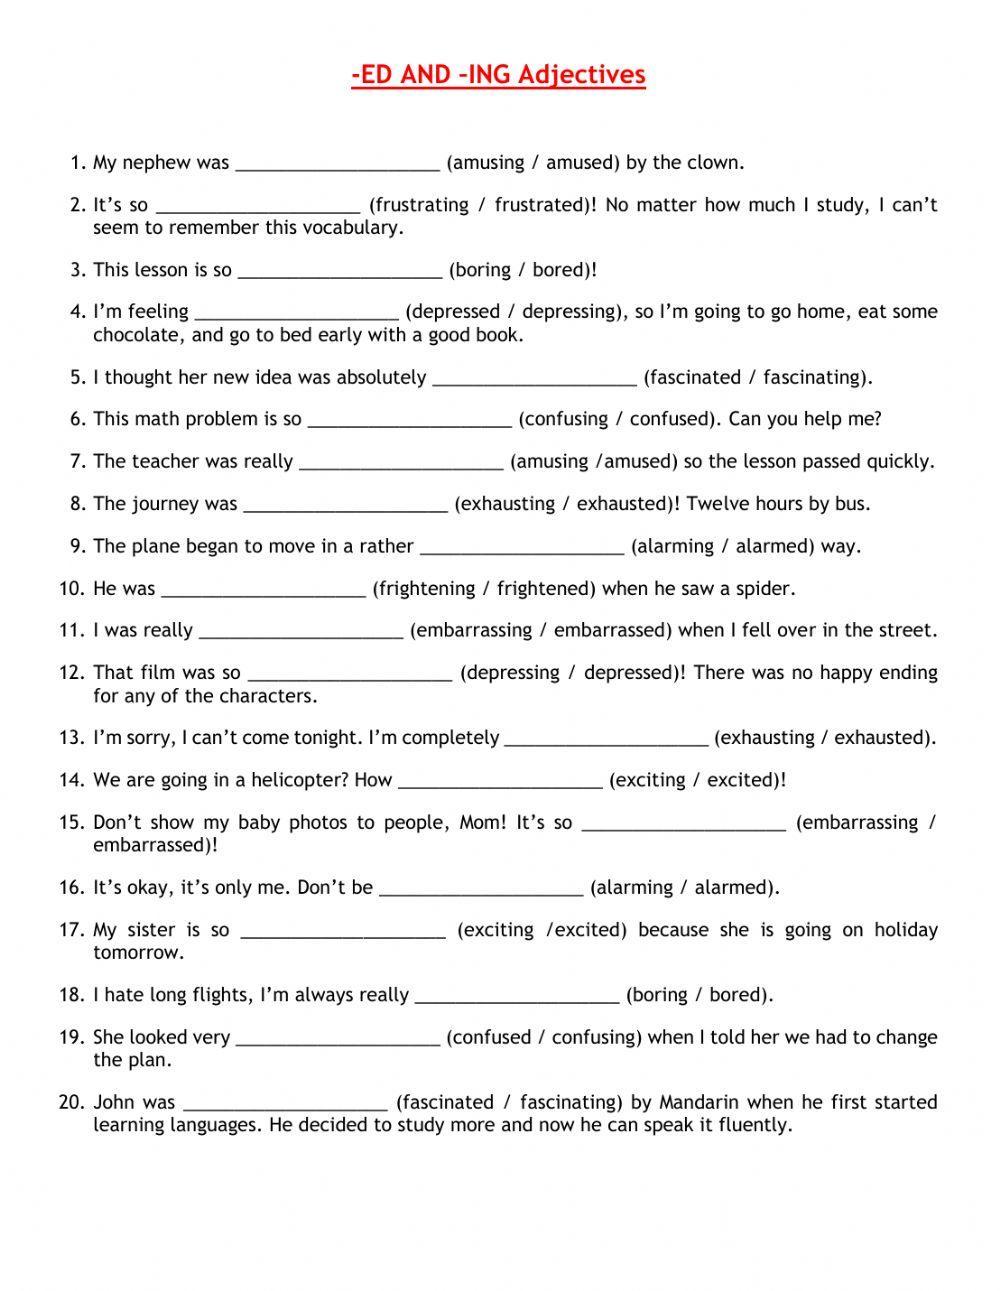 ed-and-ing-adjectives-interactive-worksheet-live-worksheets